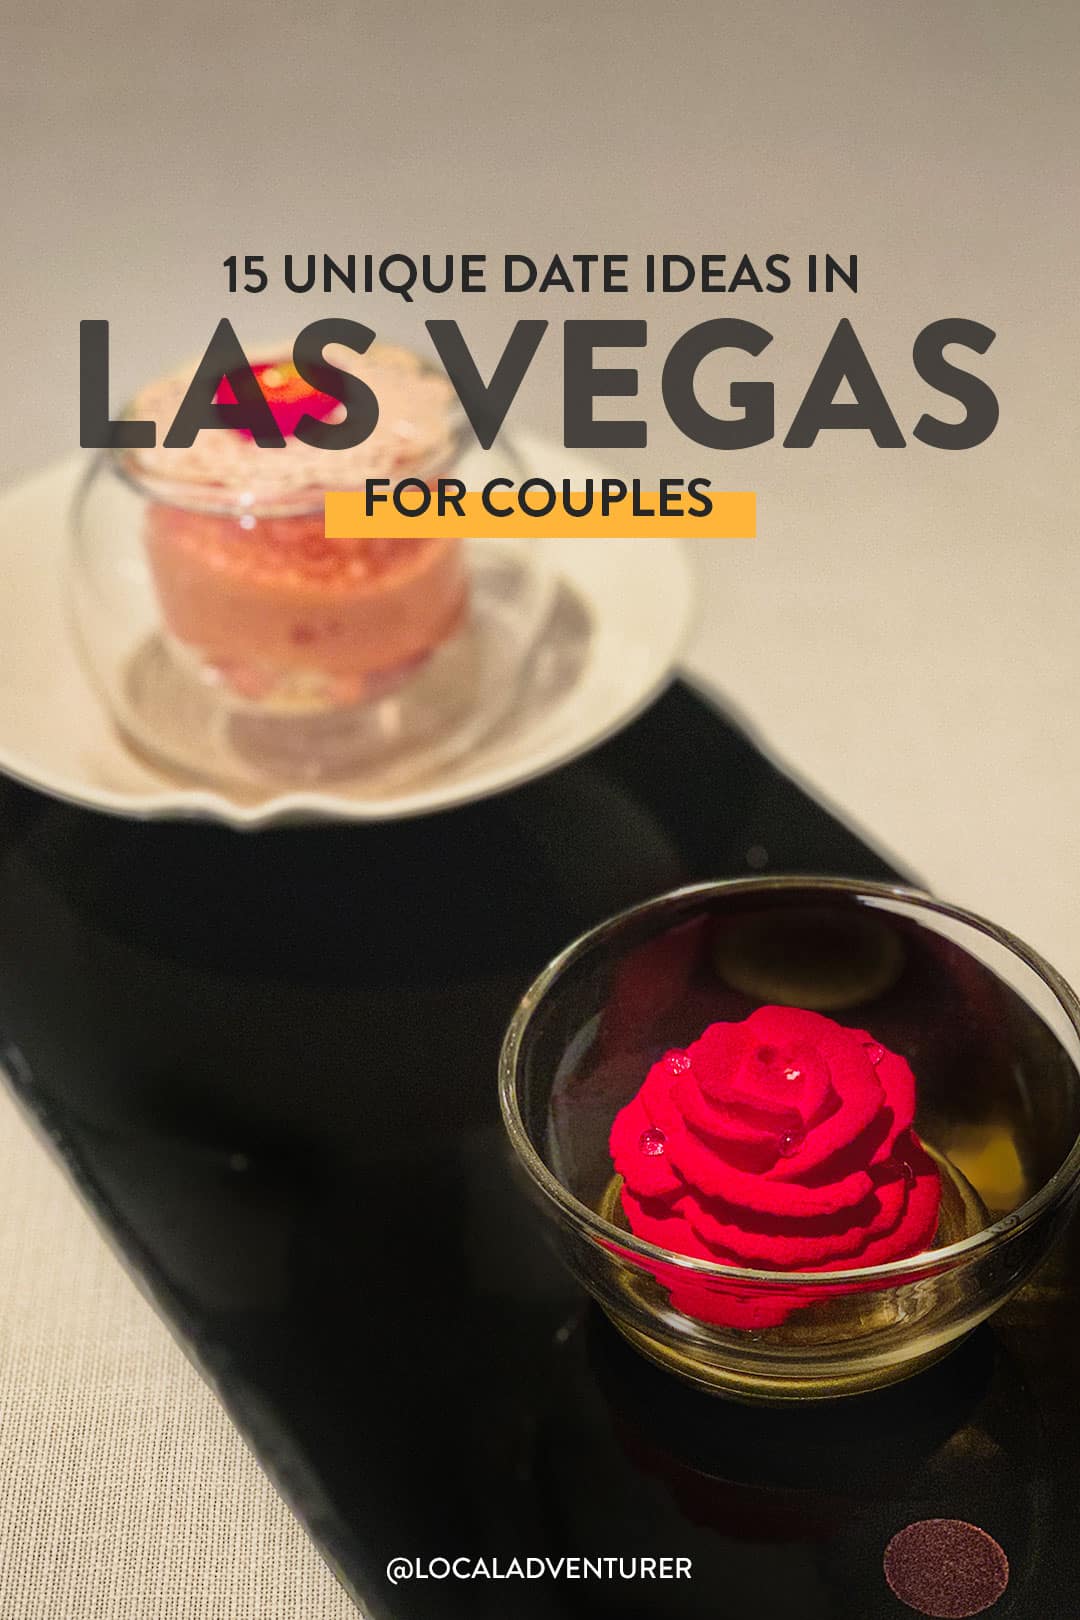 15 Unique Things to Do in Las Vegas for Couples - Date Night Ideas for Every Budget